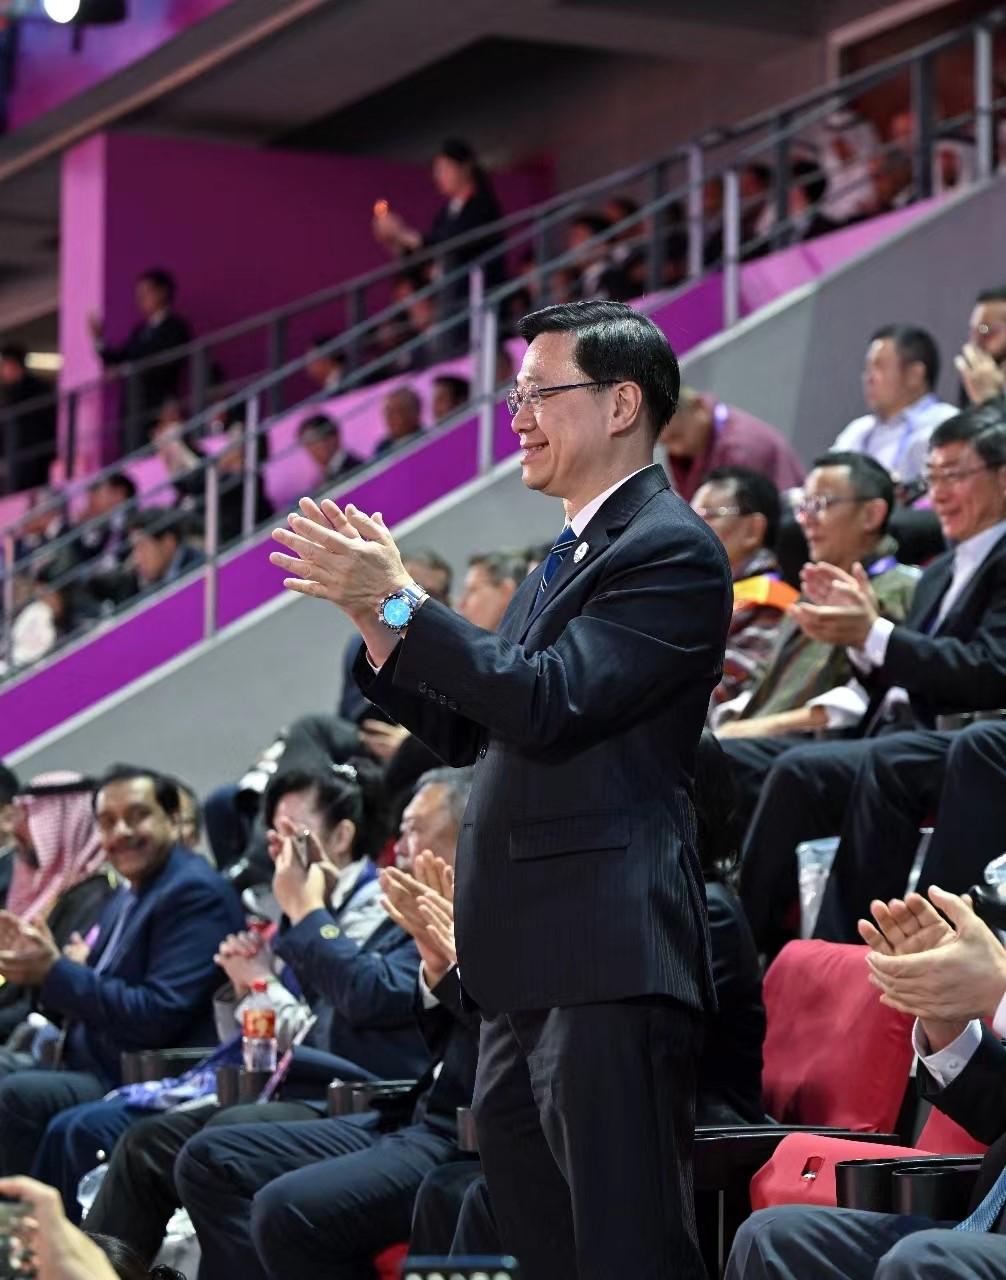 The Chief Executive, Mr John Lee, led a Hong Kong Special Administrative Region Government delegation to Hangzhou and continued his visit programme on September 23. Photo shows Mr Lee at the opening ceremony of the 19th Asian Games Hangzhou.